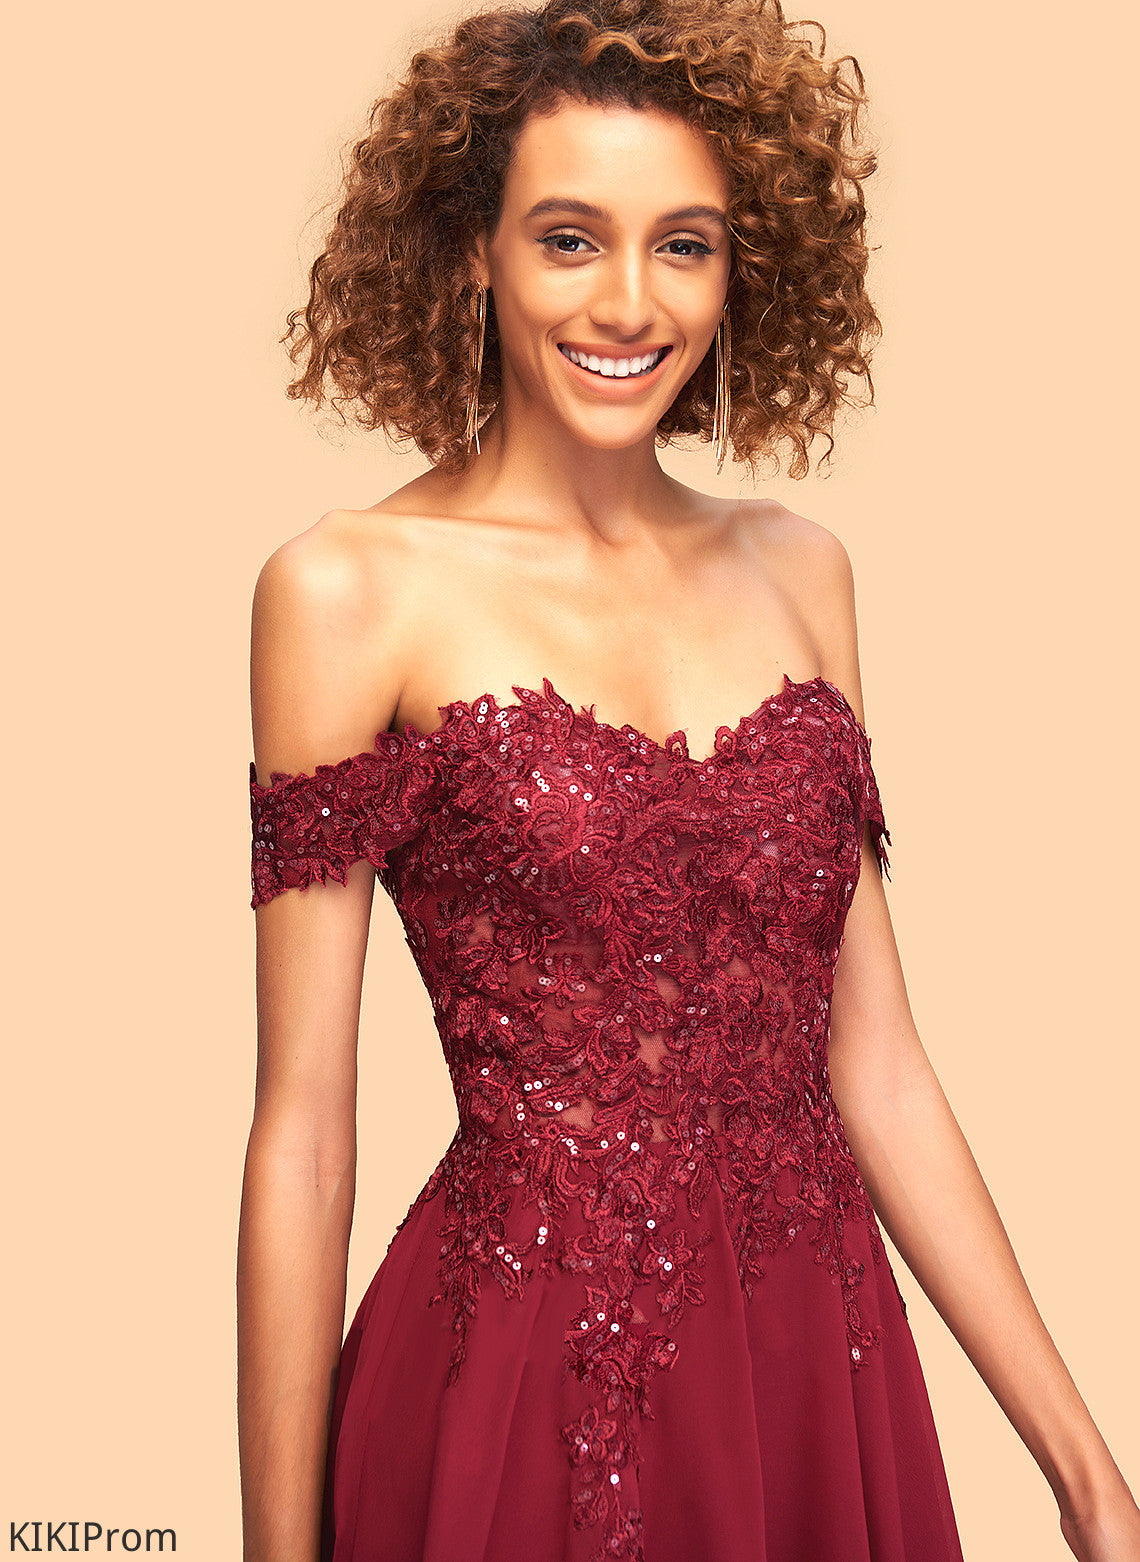 Sequins Dress A-Line Short/Mini Off-the-Shoulder With Harriet Homecoming Dresses Homecoming Lace Chiffon